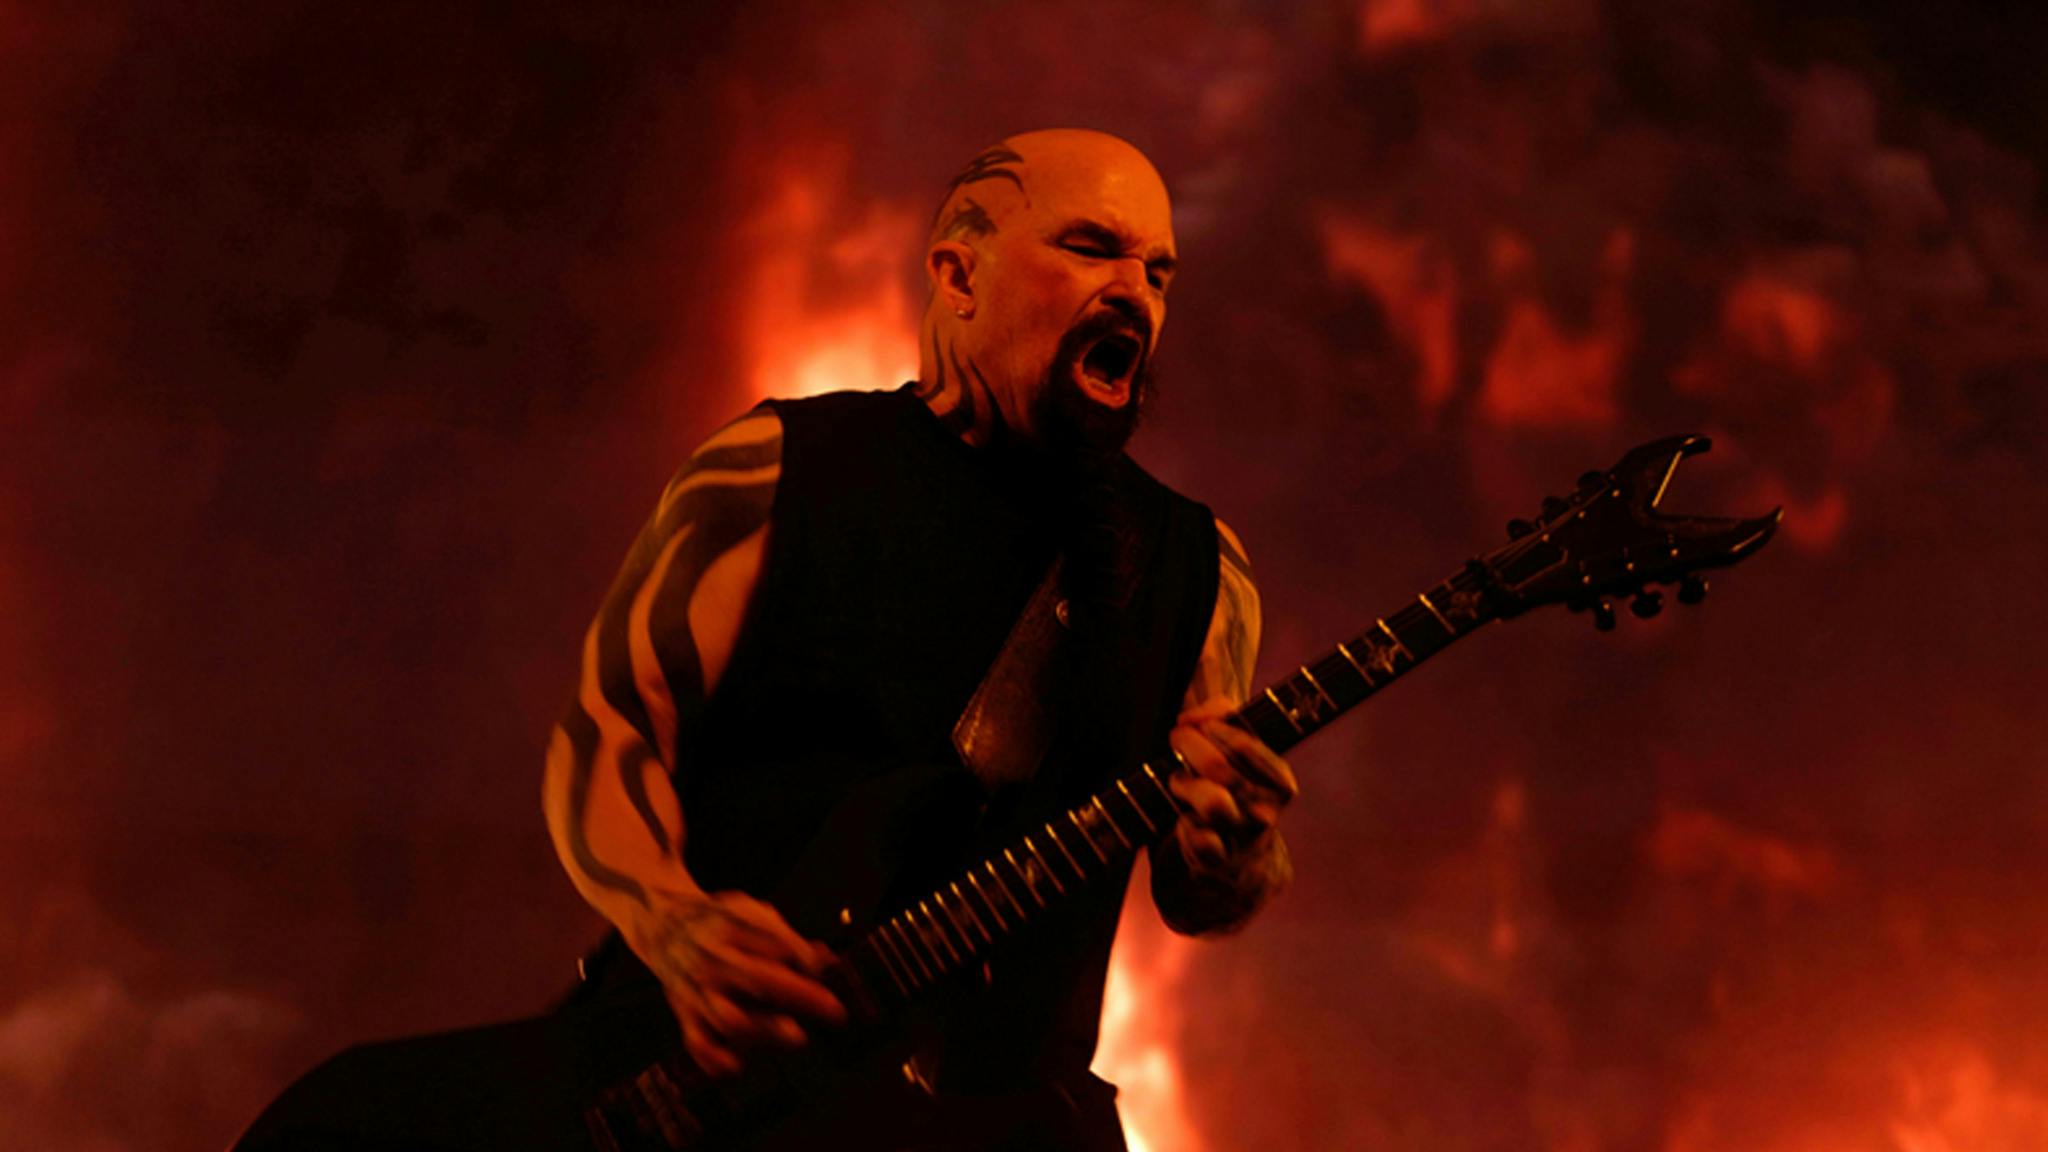 Watch the fire-tastic video for Kerry King’s new single Residue